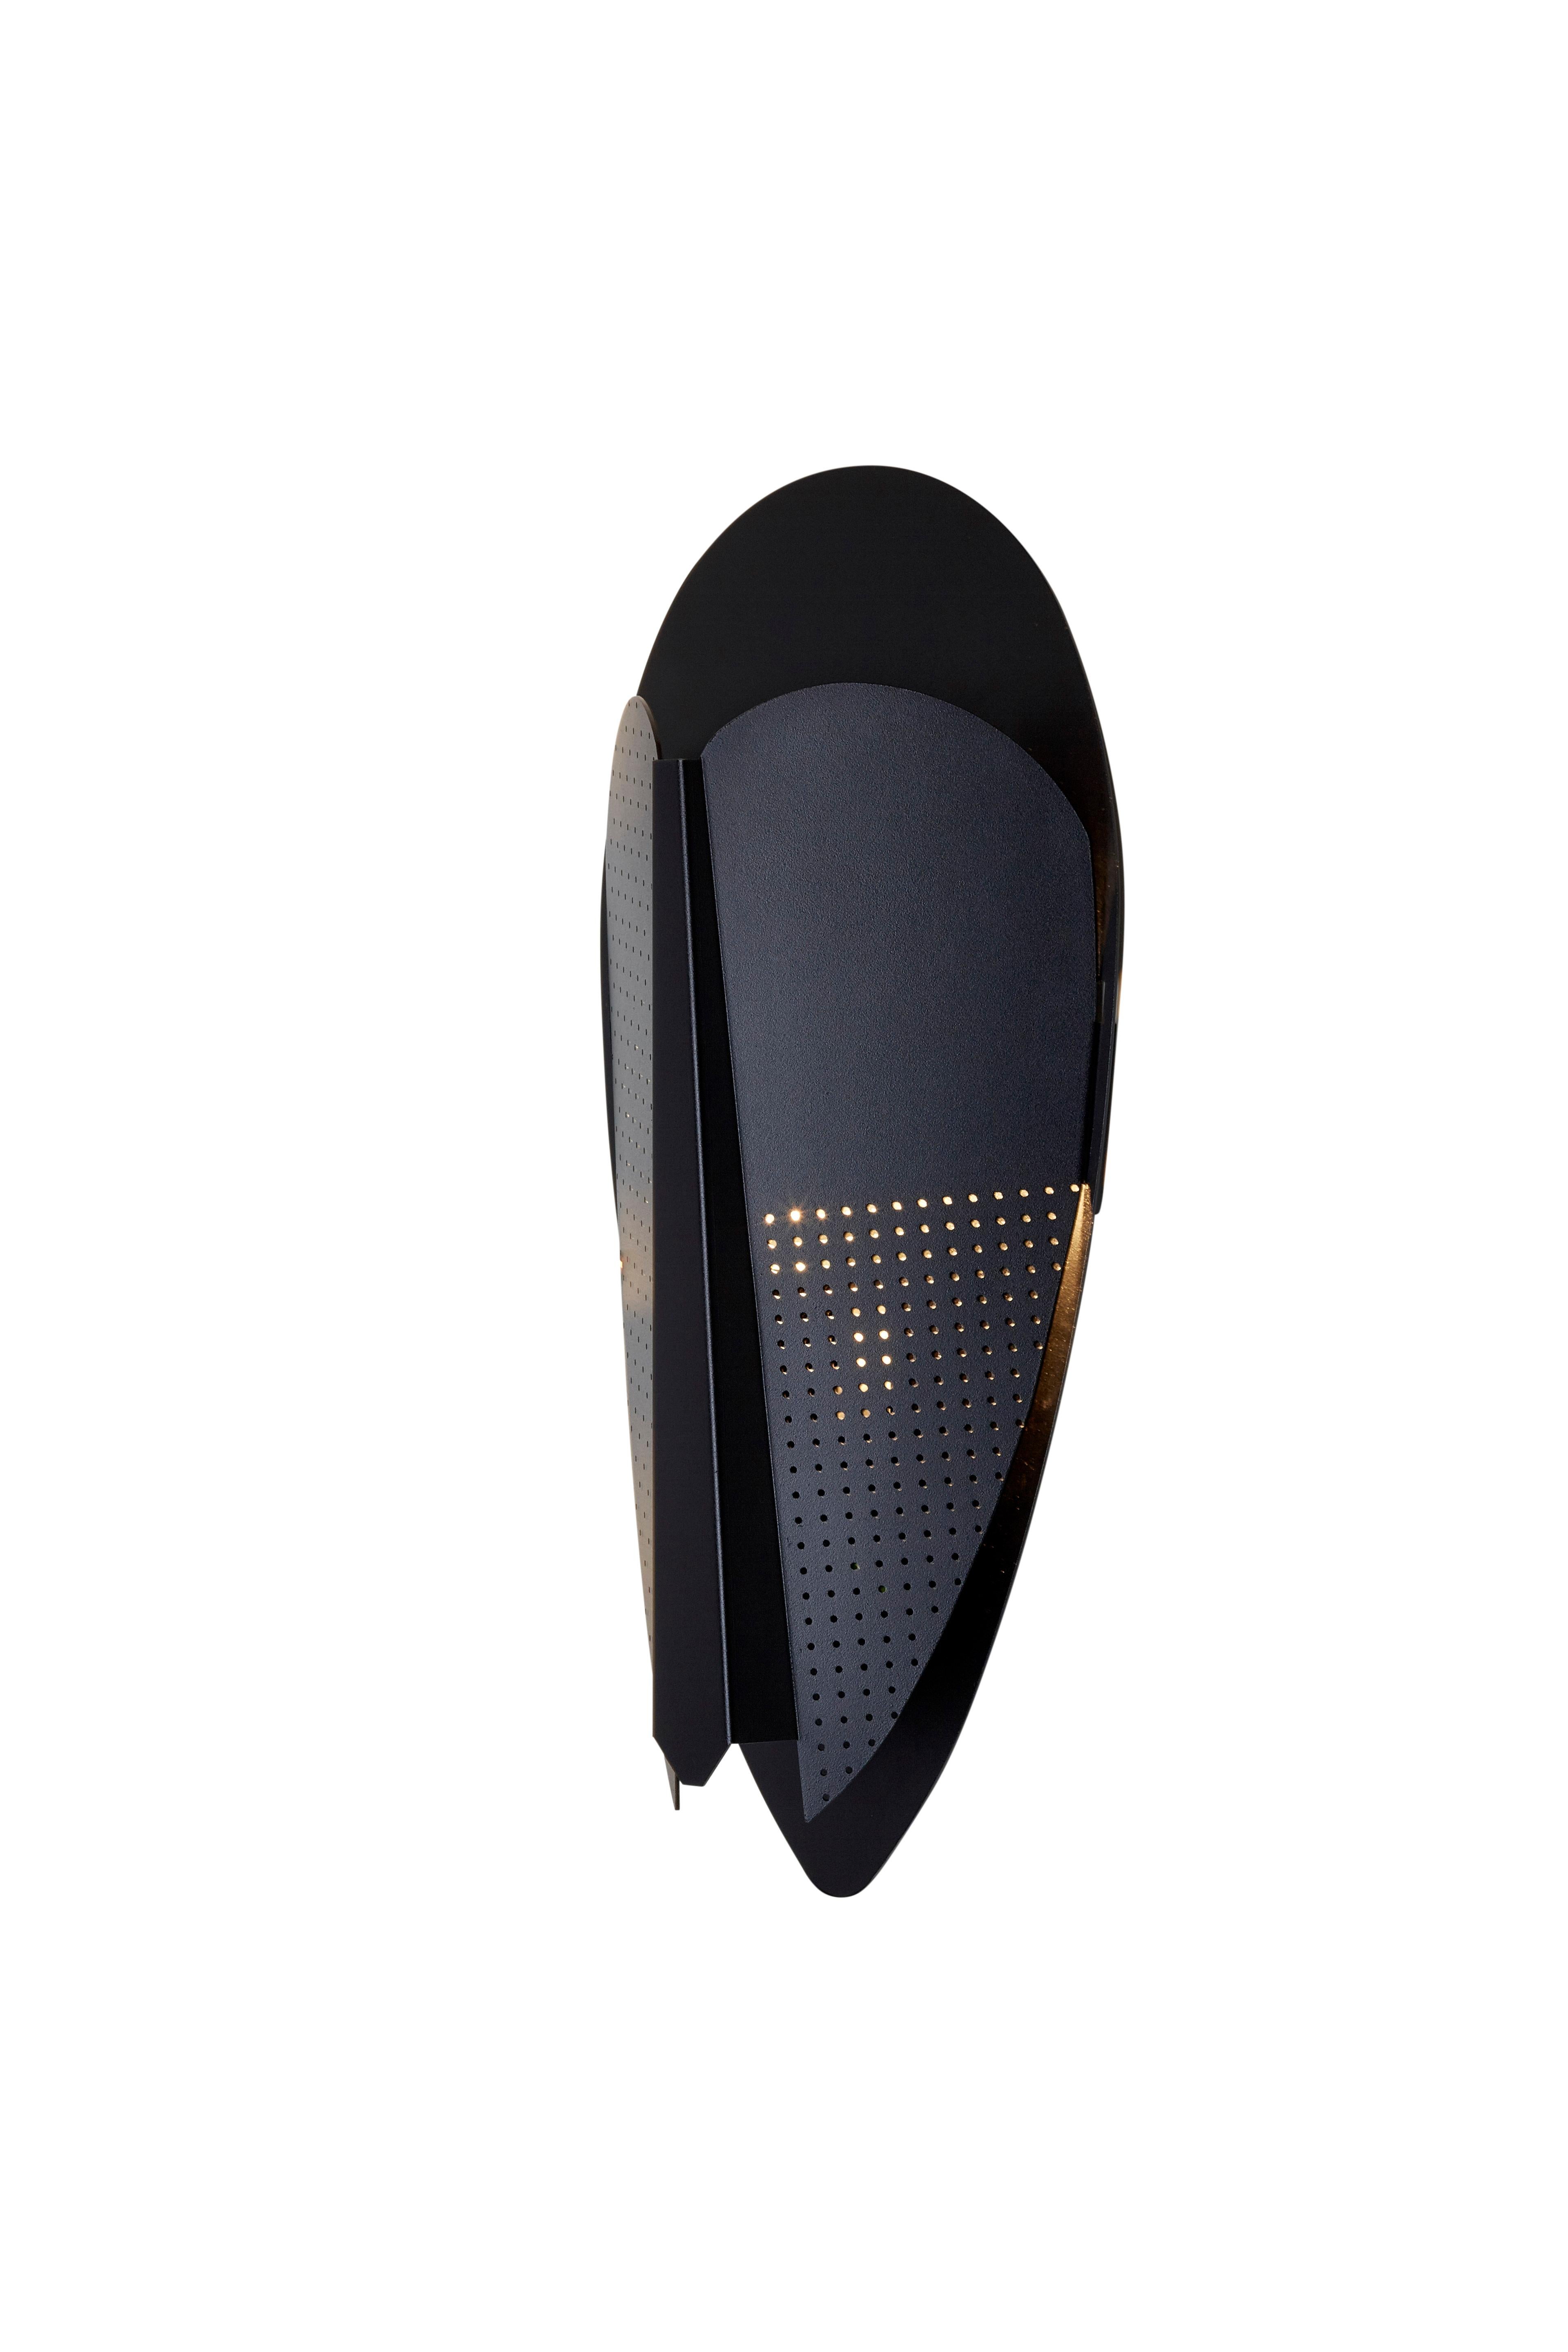 Sorcier Wall Light Black In New Condition For Sale In Beverly Hills, CA